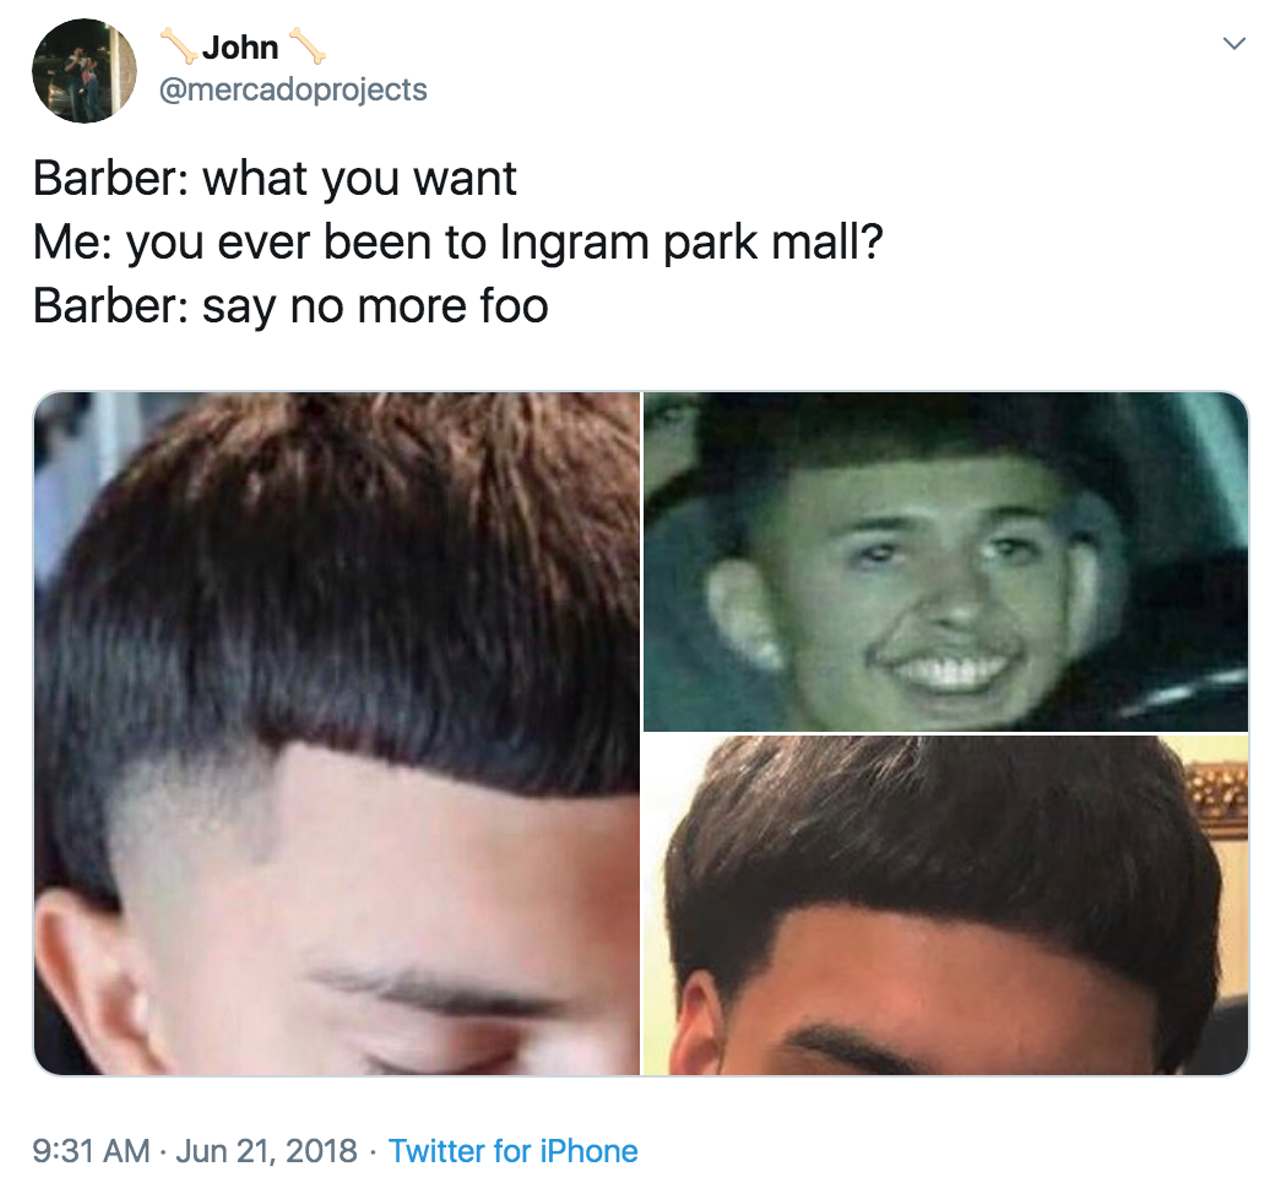 Someone who hangs out at Ingram Park Mall
If you’re really down, you’ll get the haircut and everything. Be warned, you may lead a life of petty crime if you do.
Photo via Twitter / mercadoprojects